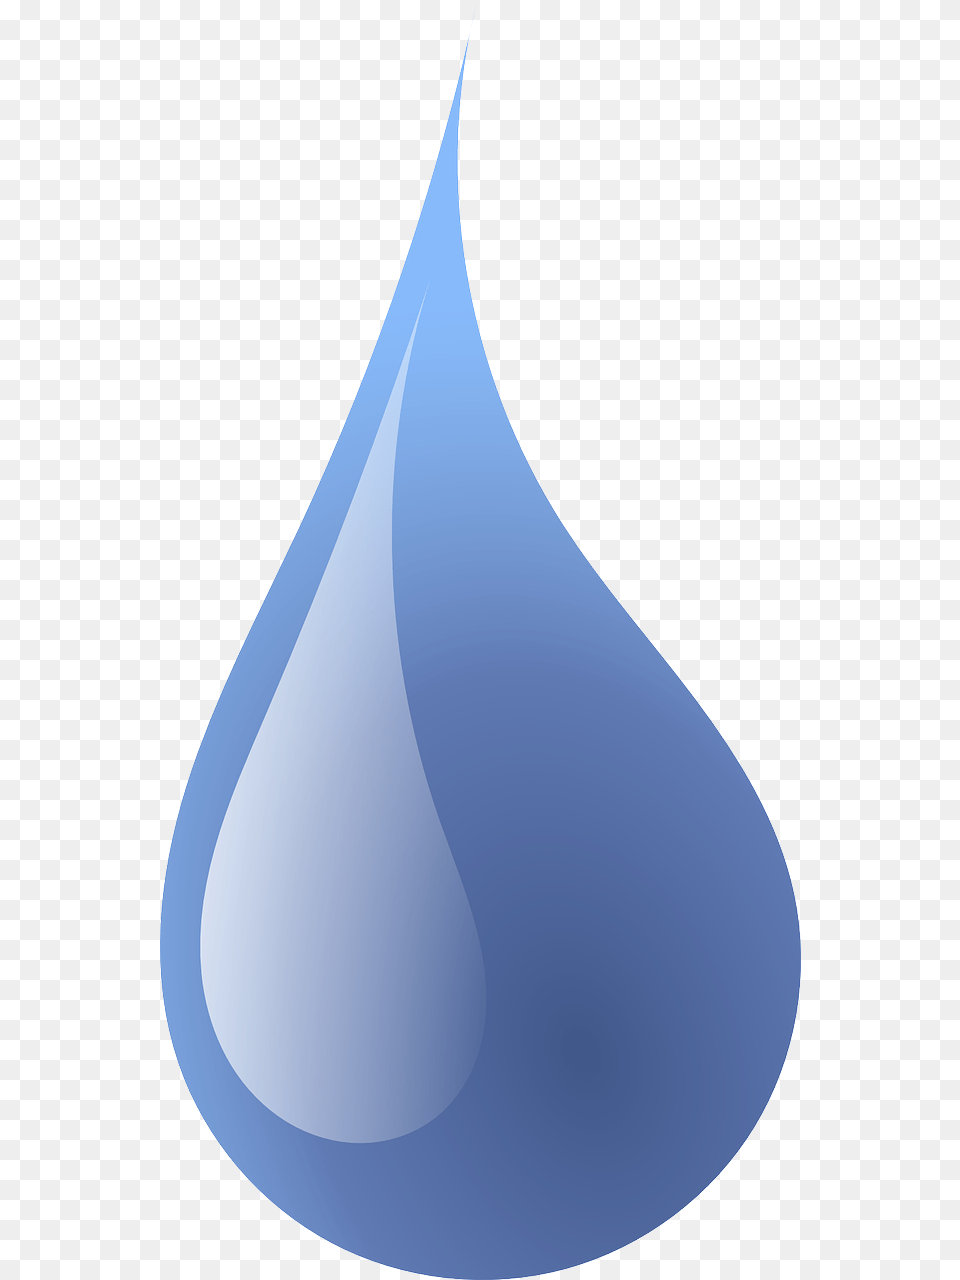 Tears Crying Images Clip Art Water Drop Transparent, Droplet, Outdoors Free Png Download